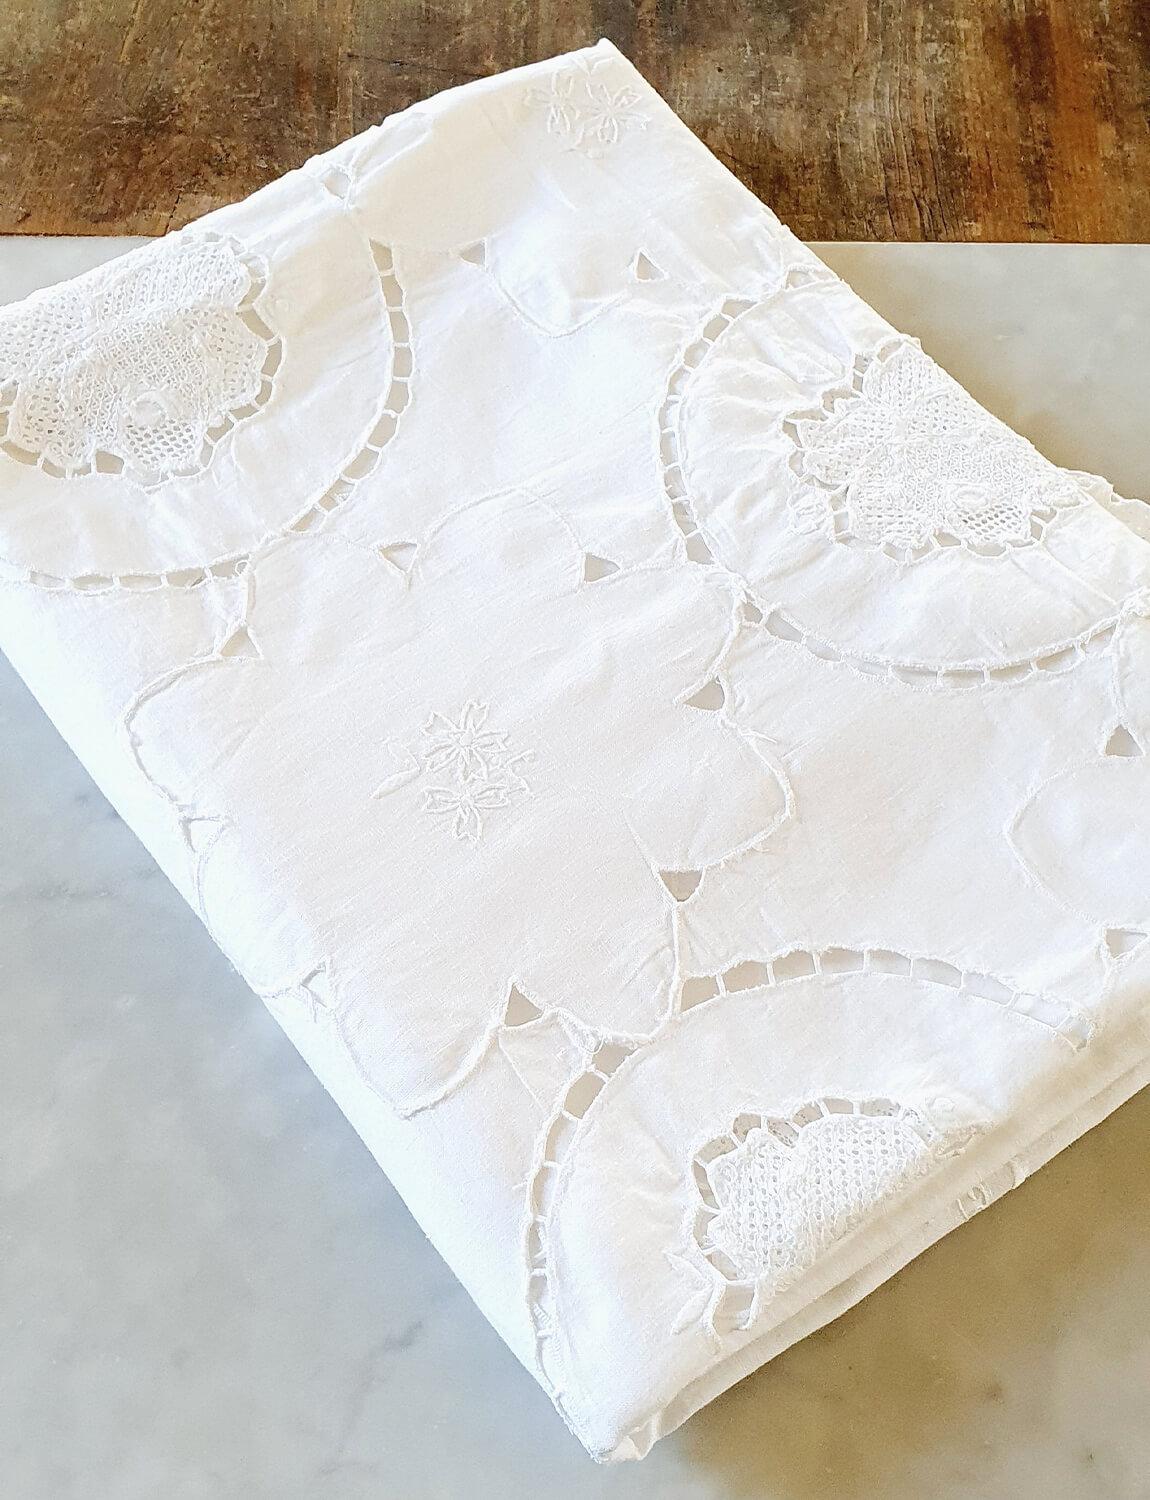 A wonderful hand-embroidered large white Italian linen tablecloth found in a market in Umbria. I am very particular when it comes to vintage tablecloths favouring only some designs. This is wonderful - 1940s but perfect for a modern countryside